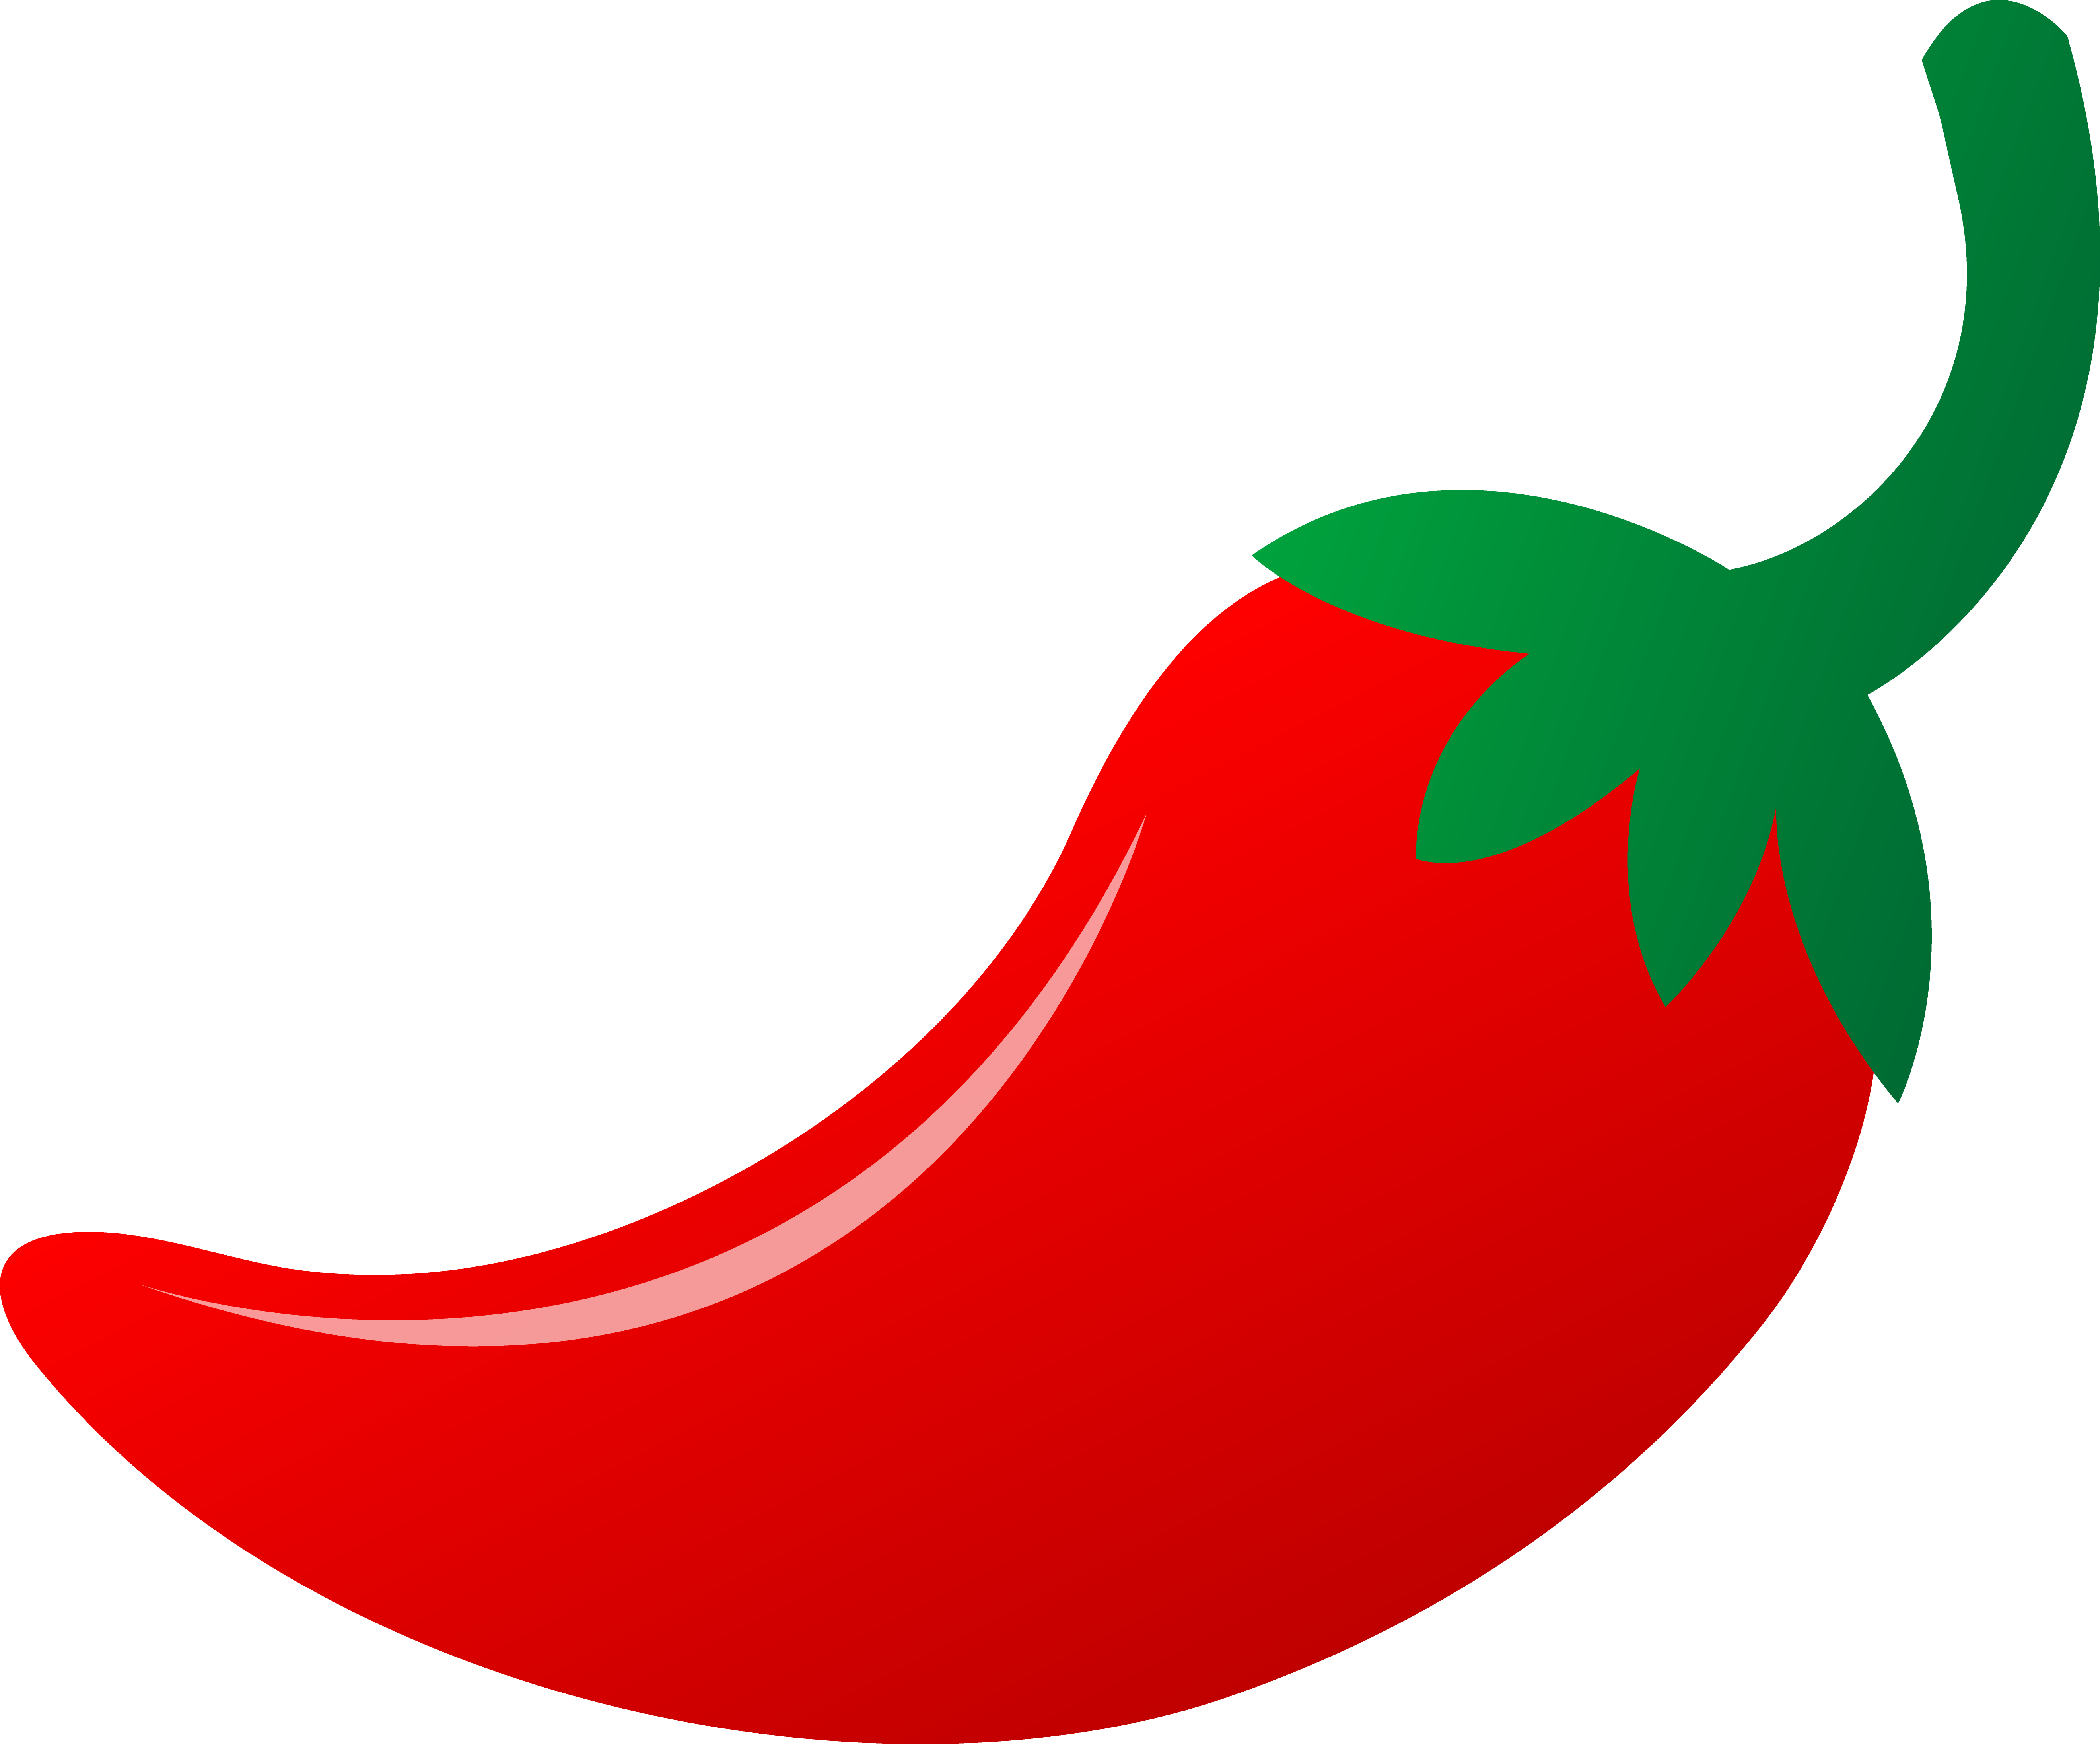 Spicy Food Pictures - Draw A Chili Pepper (5280x4385)